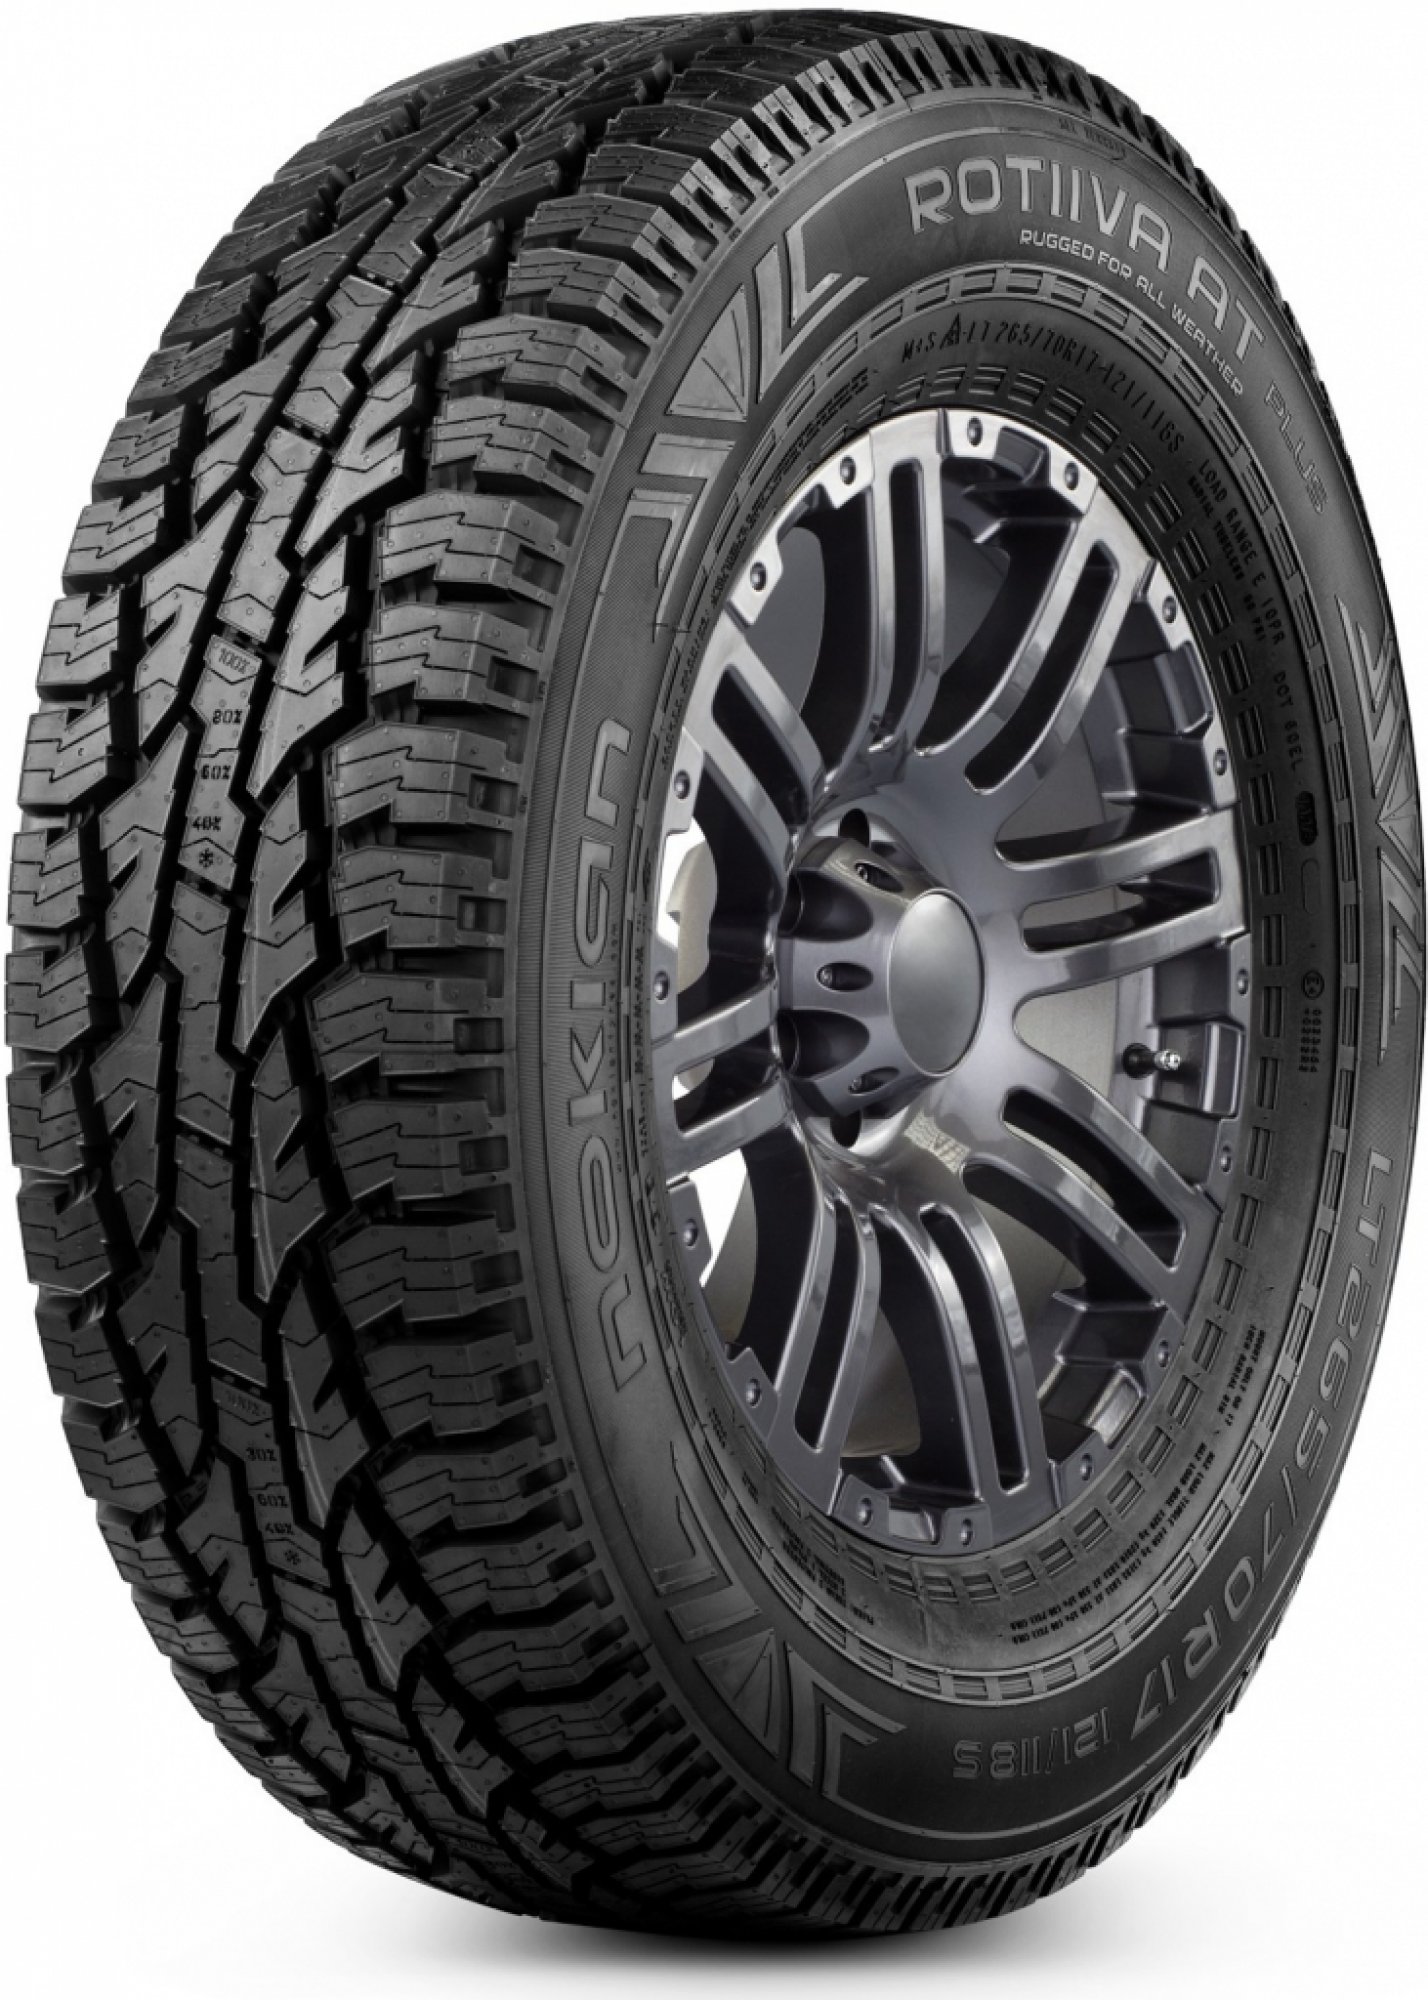 NOKIAN TYRES ROTIIVA AT PLUS 265/70 R 18 124/121S